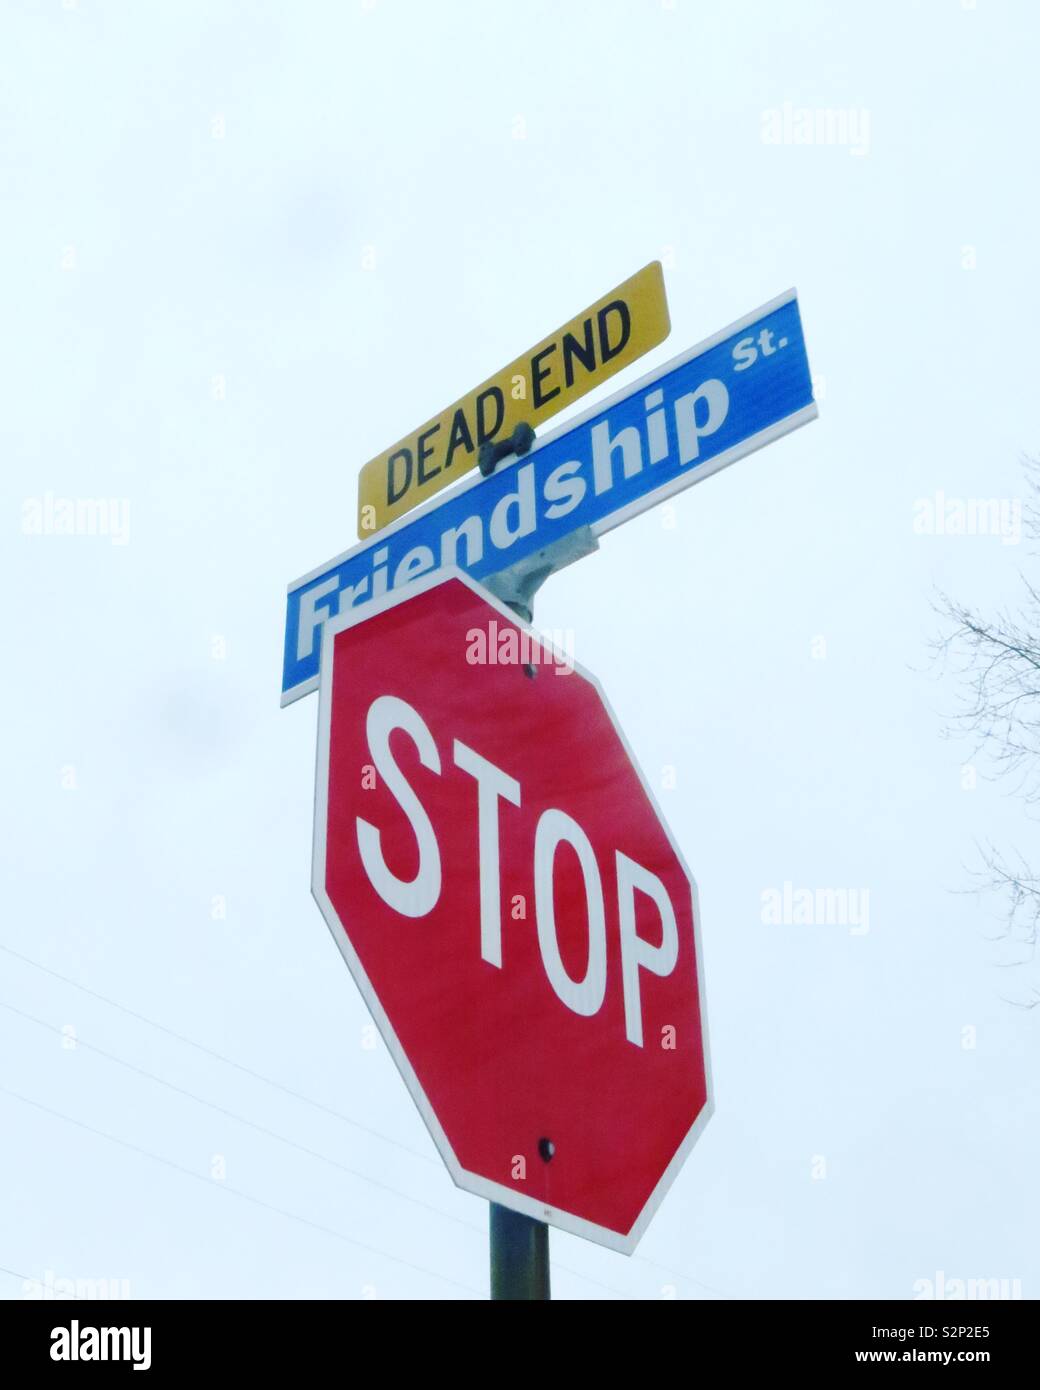 Dead End Relationship Stock Photo